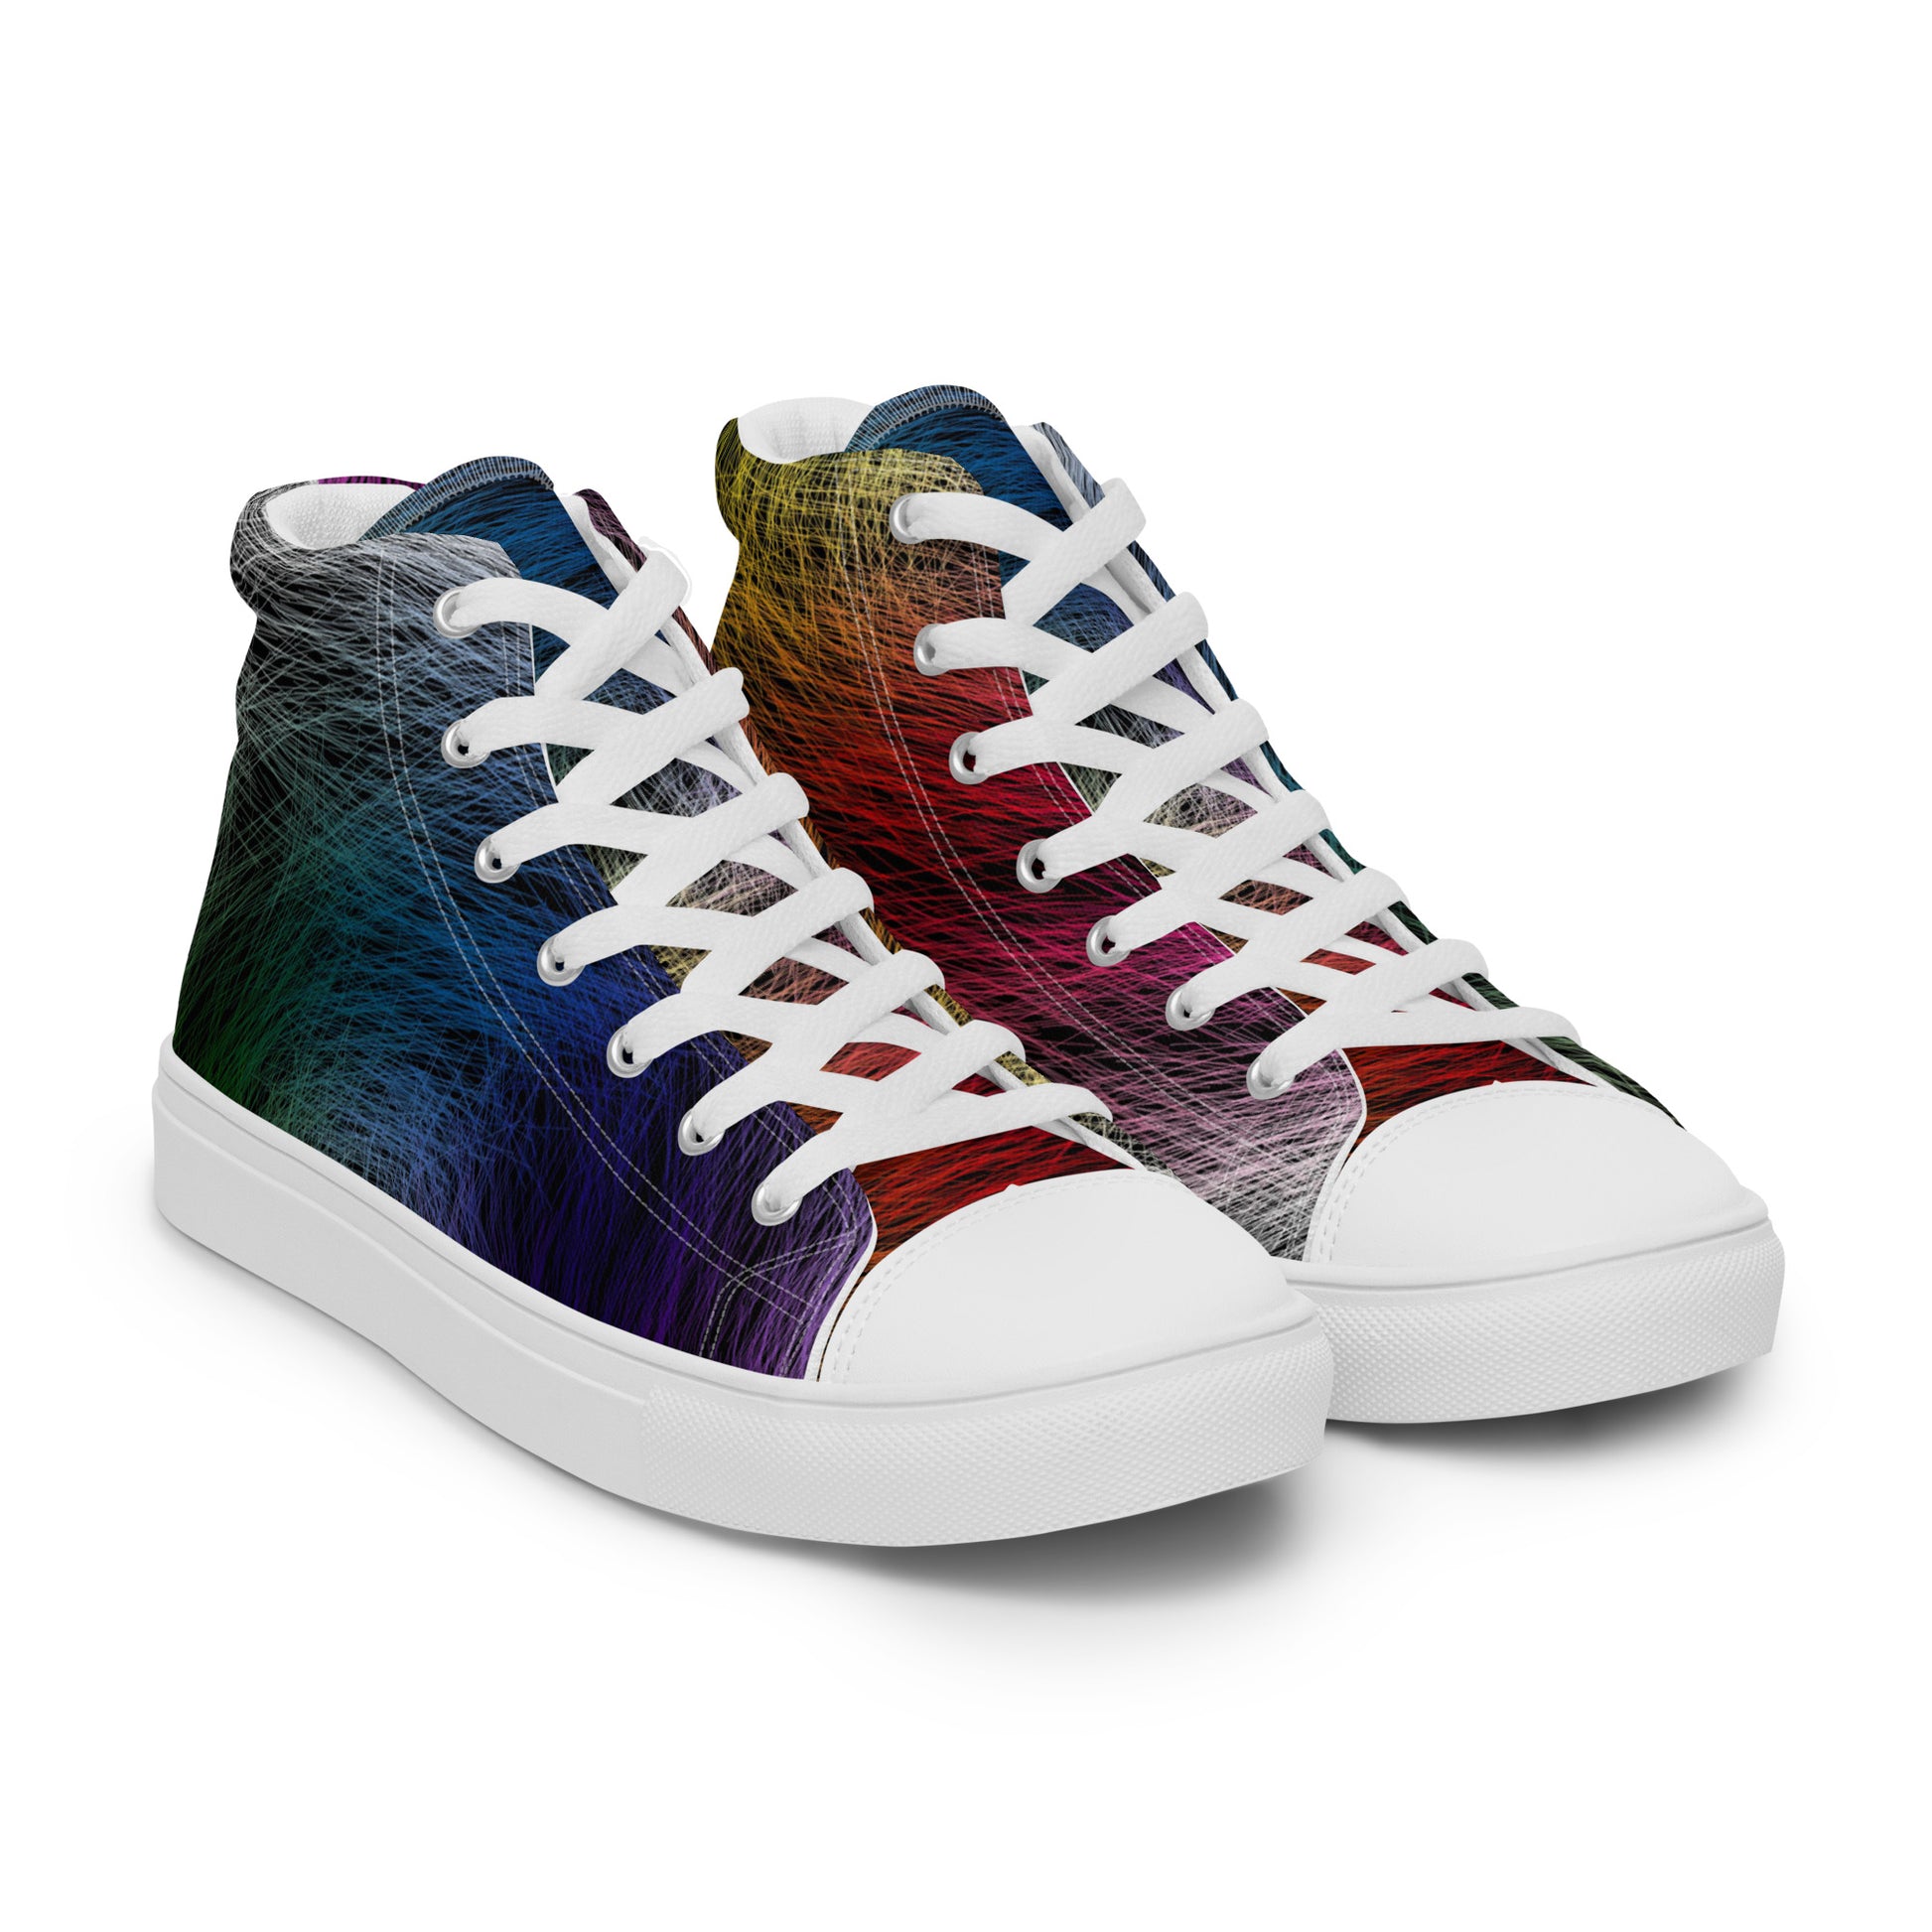 Wild Rainbow Women’s High Top Canvas Shoes | Casual LGBTQ+ Shoes | Stylish Festival Sneakers | Pride Shoes | Lace Up Sneakers | - Comfortable Culture - Shoes - Comfortable Culture